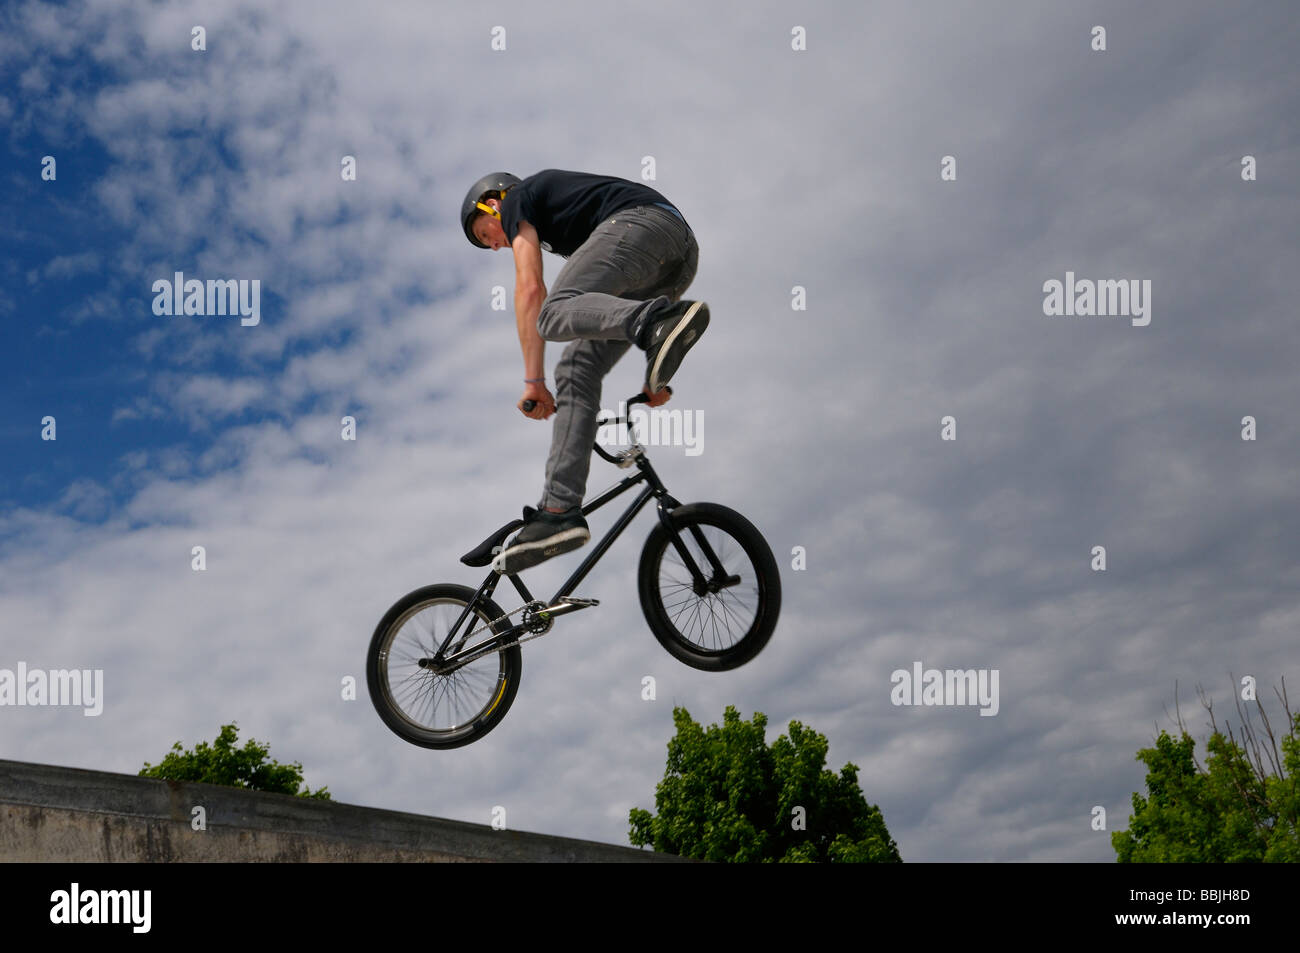 BMX bike rider exiting a bowl air out with a Tail Whip 360 spin Toronto skatepark Stock Photo